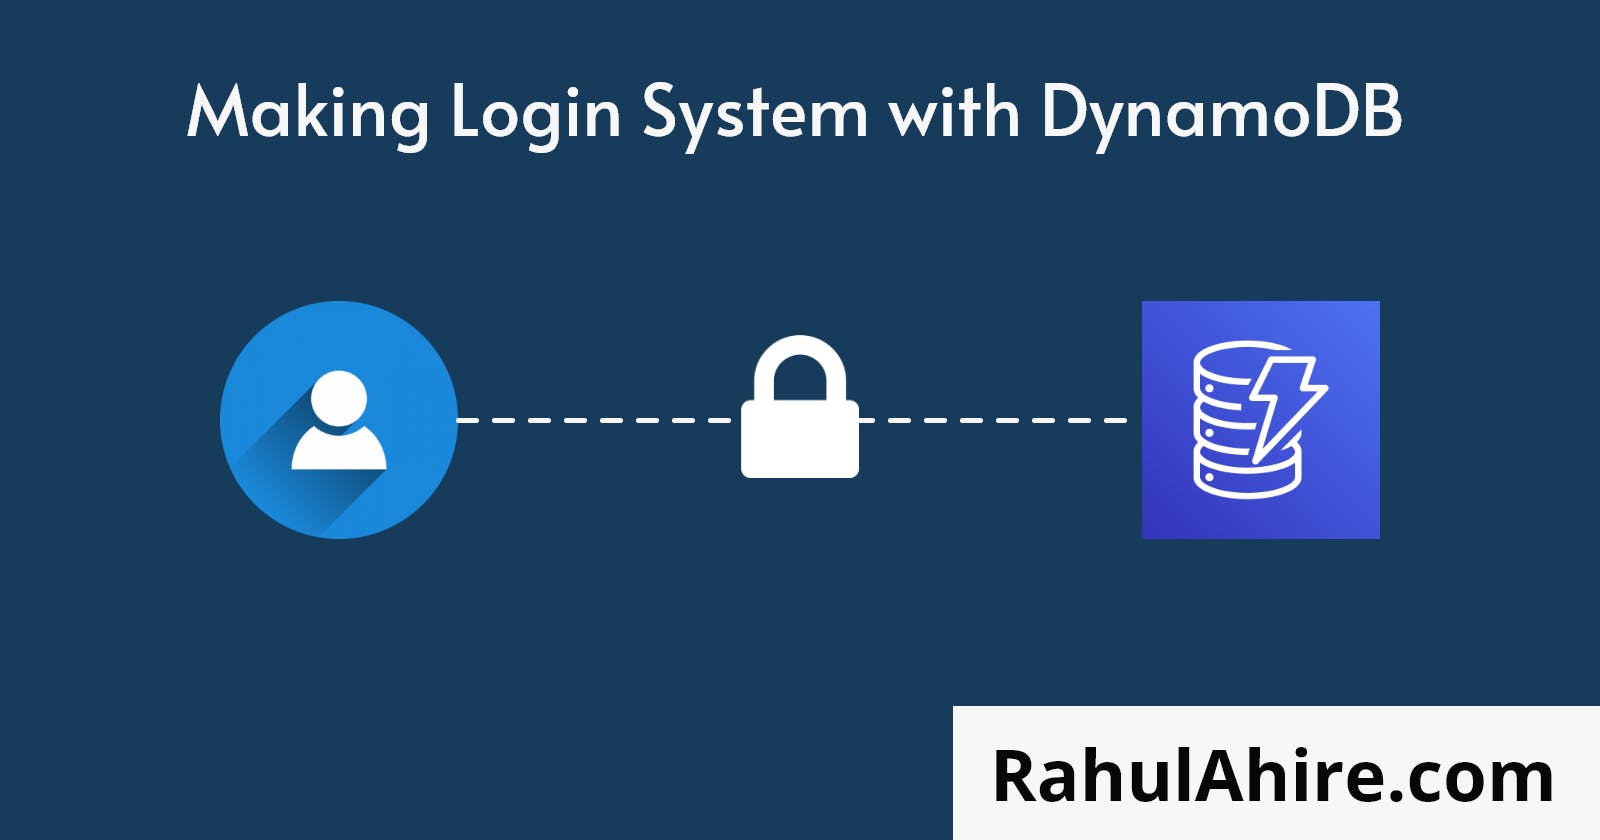 How to implement login system using DynamoDB - By Rahul Ahire